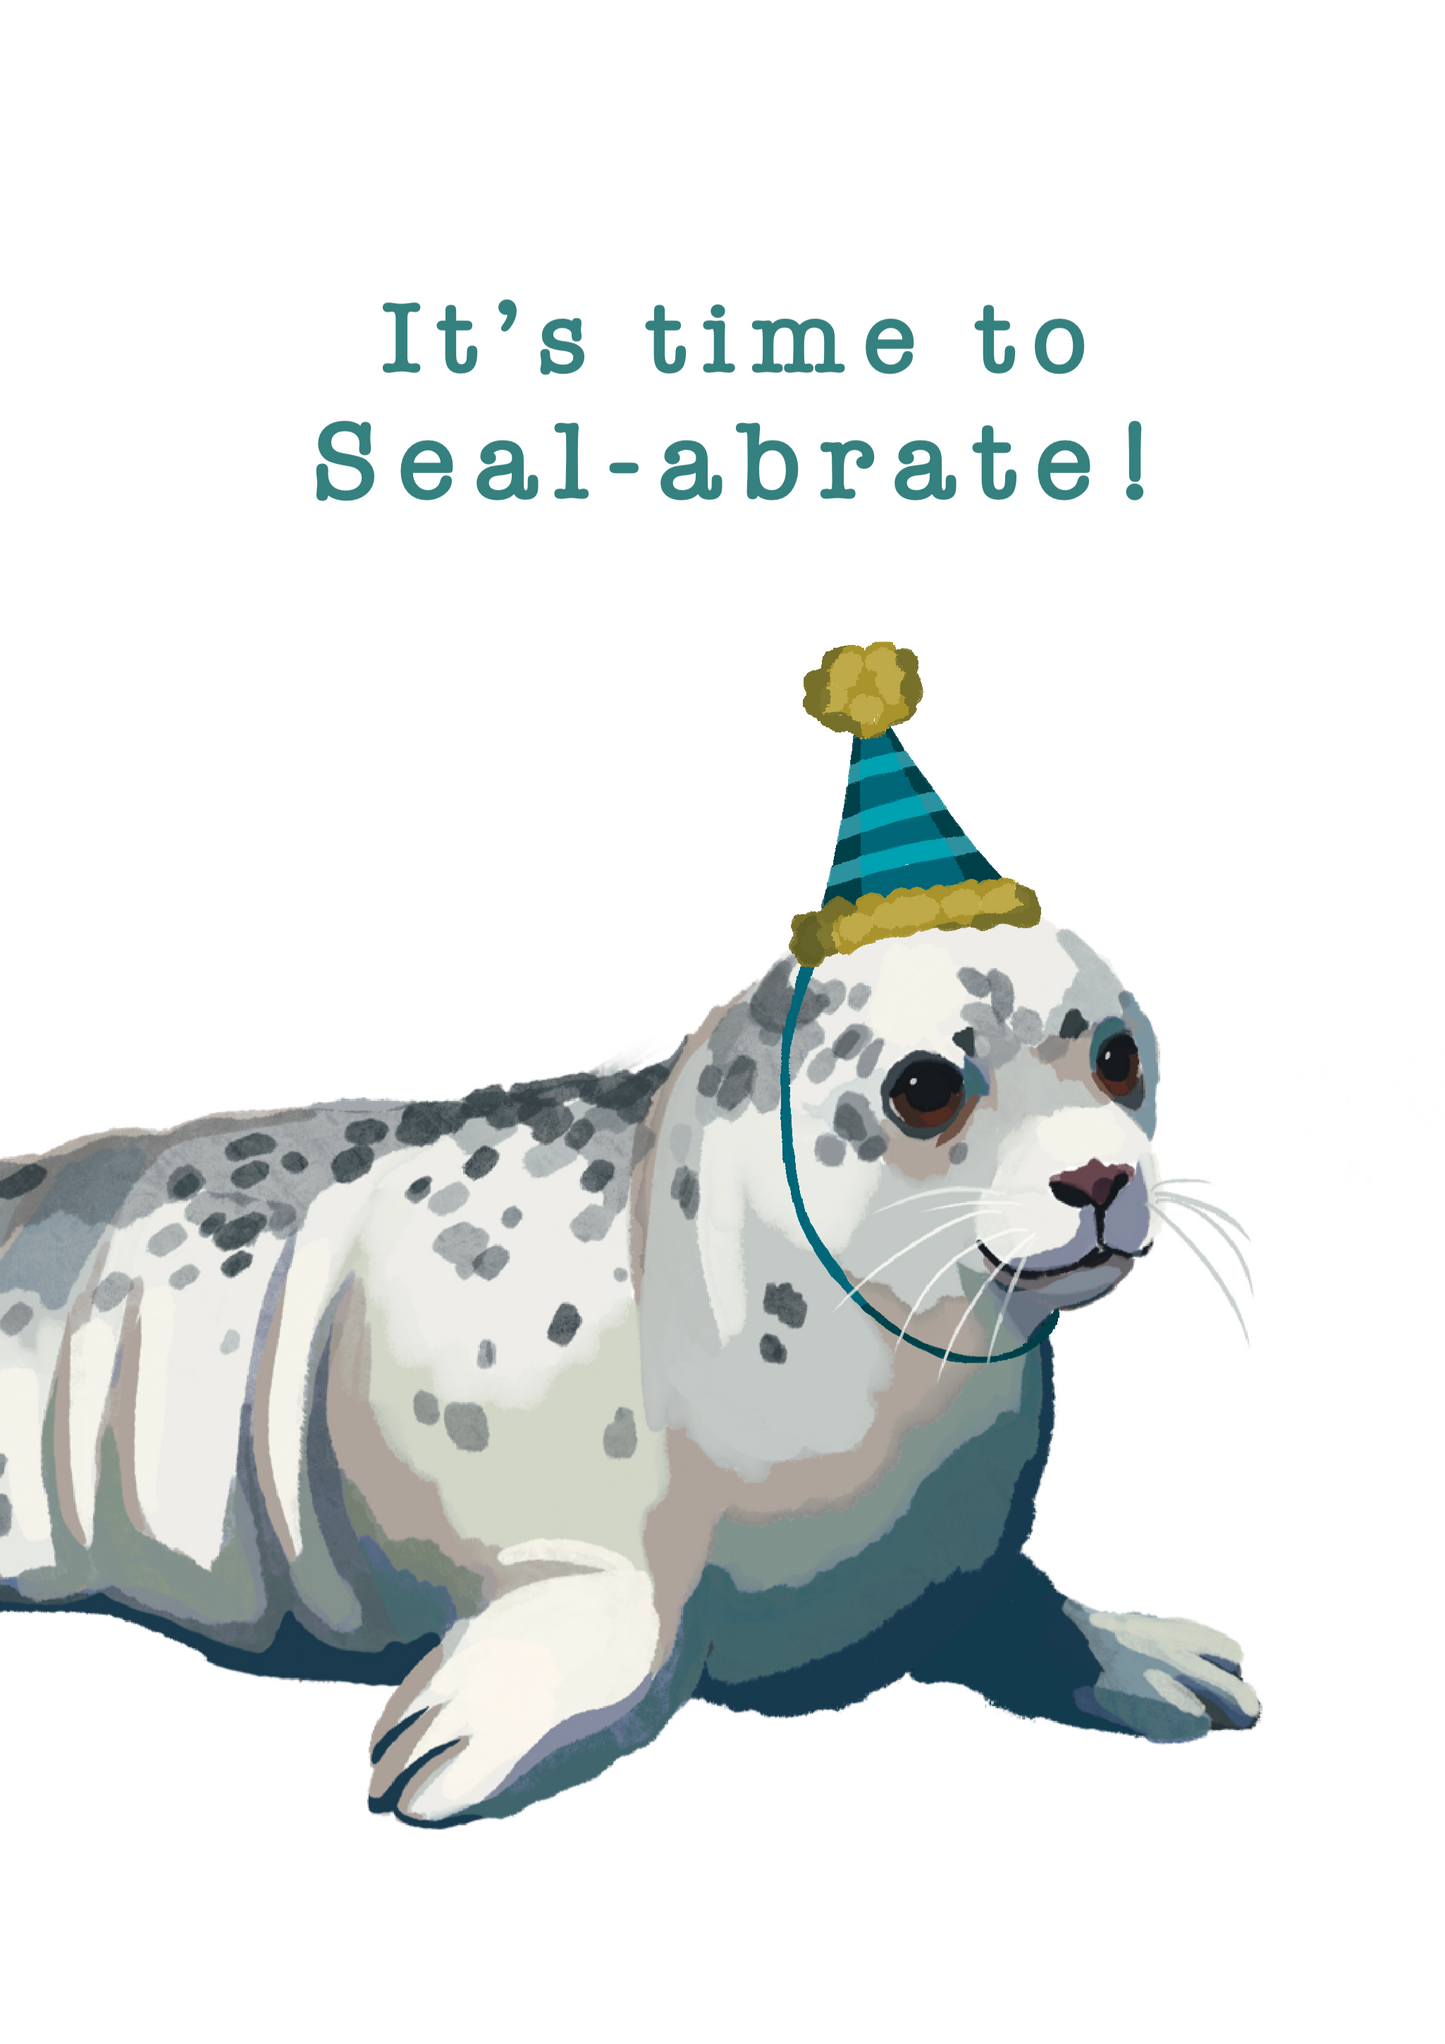 Seal-abrate